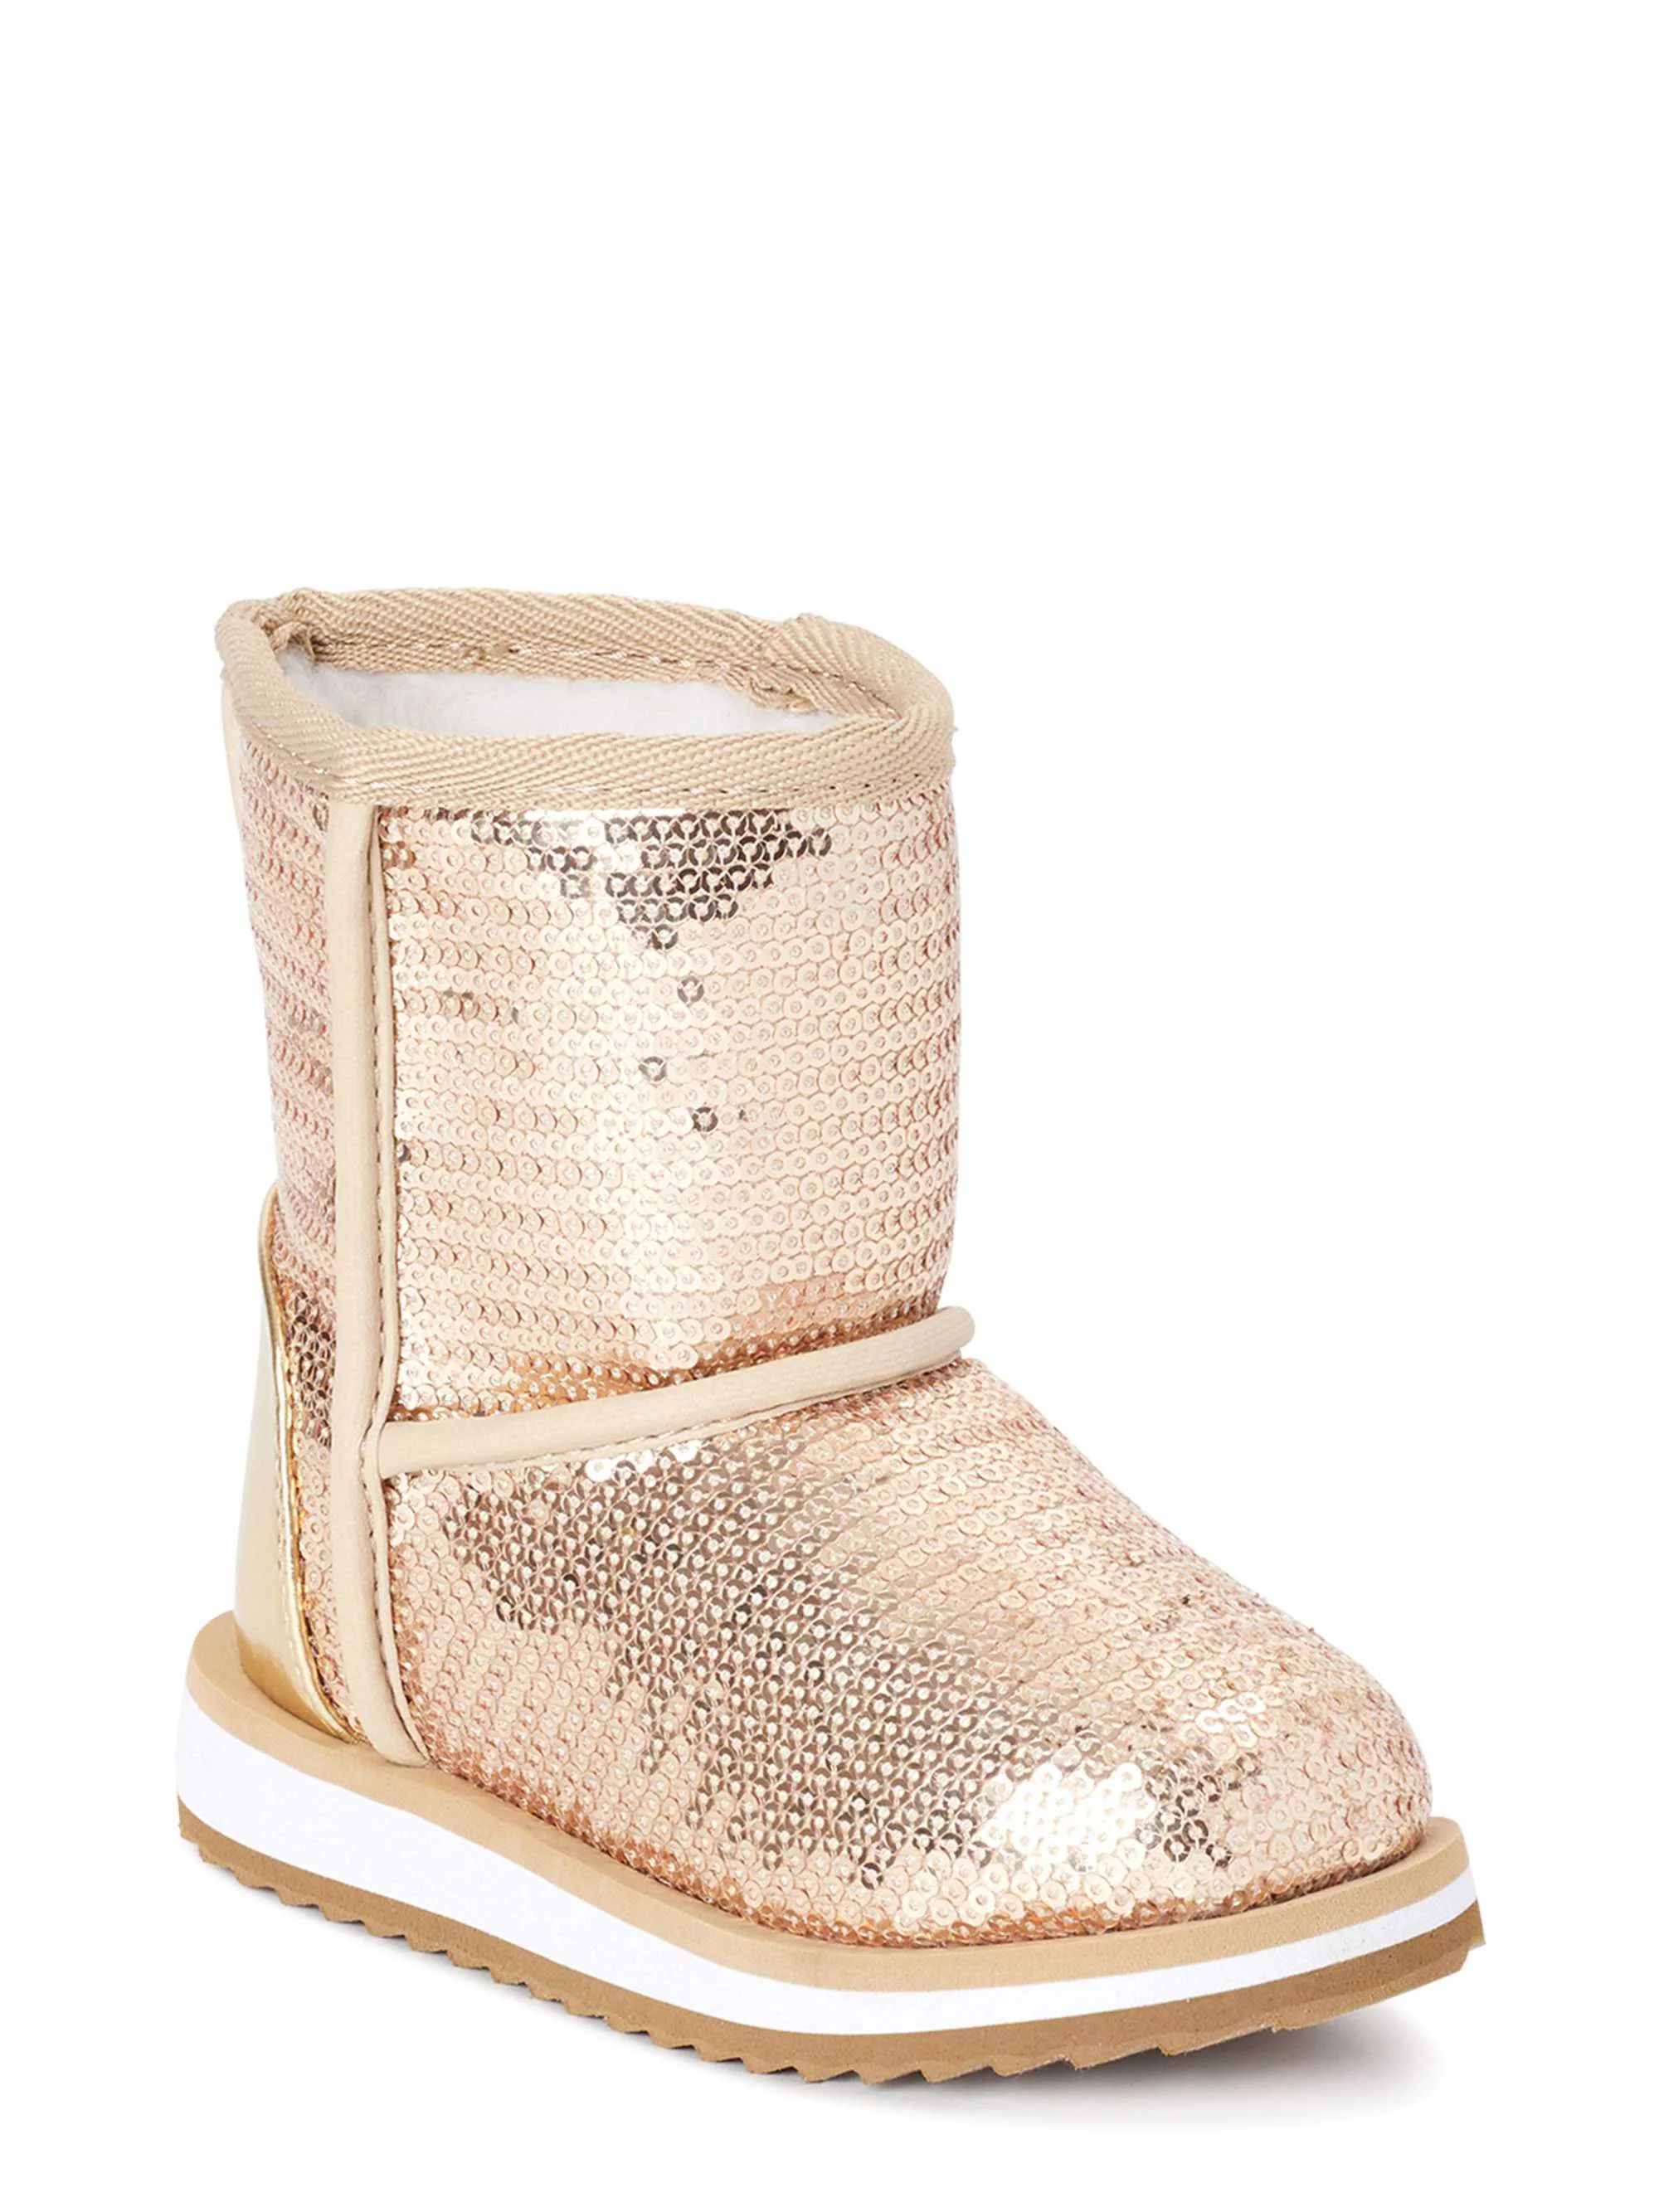 Wonder Nation Toddler Girls Shiny Sequin Faux Shearling Boots | Walmart (US)